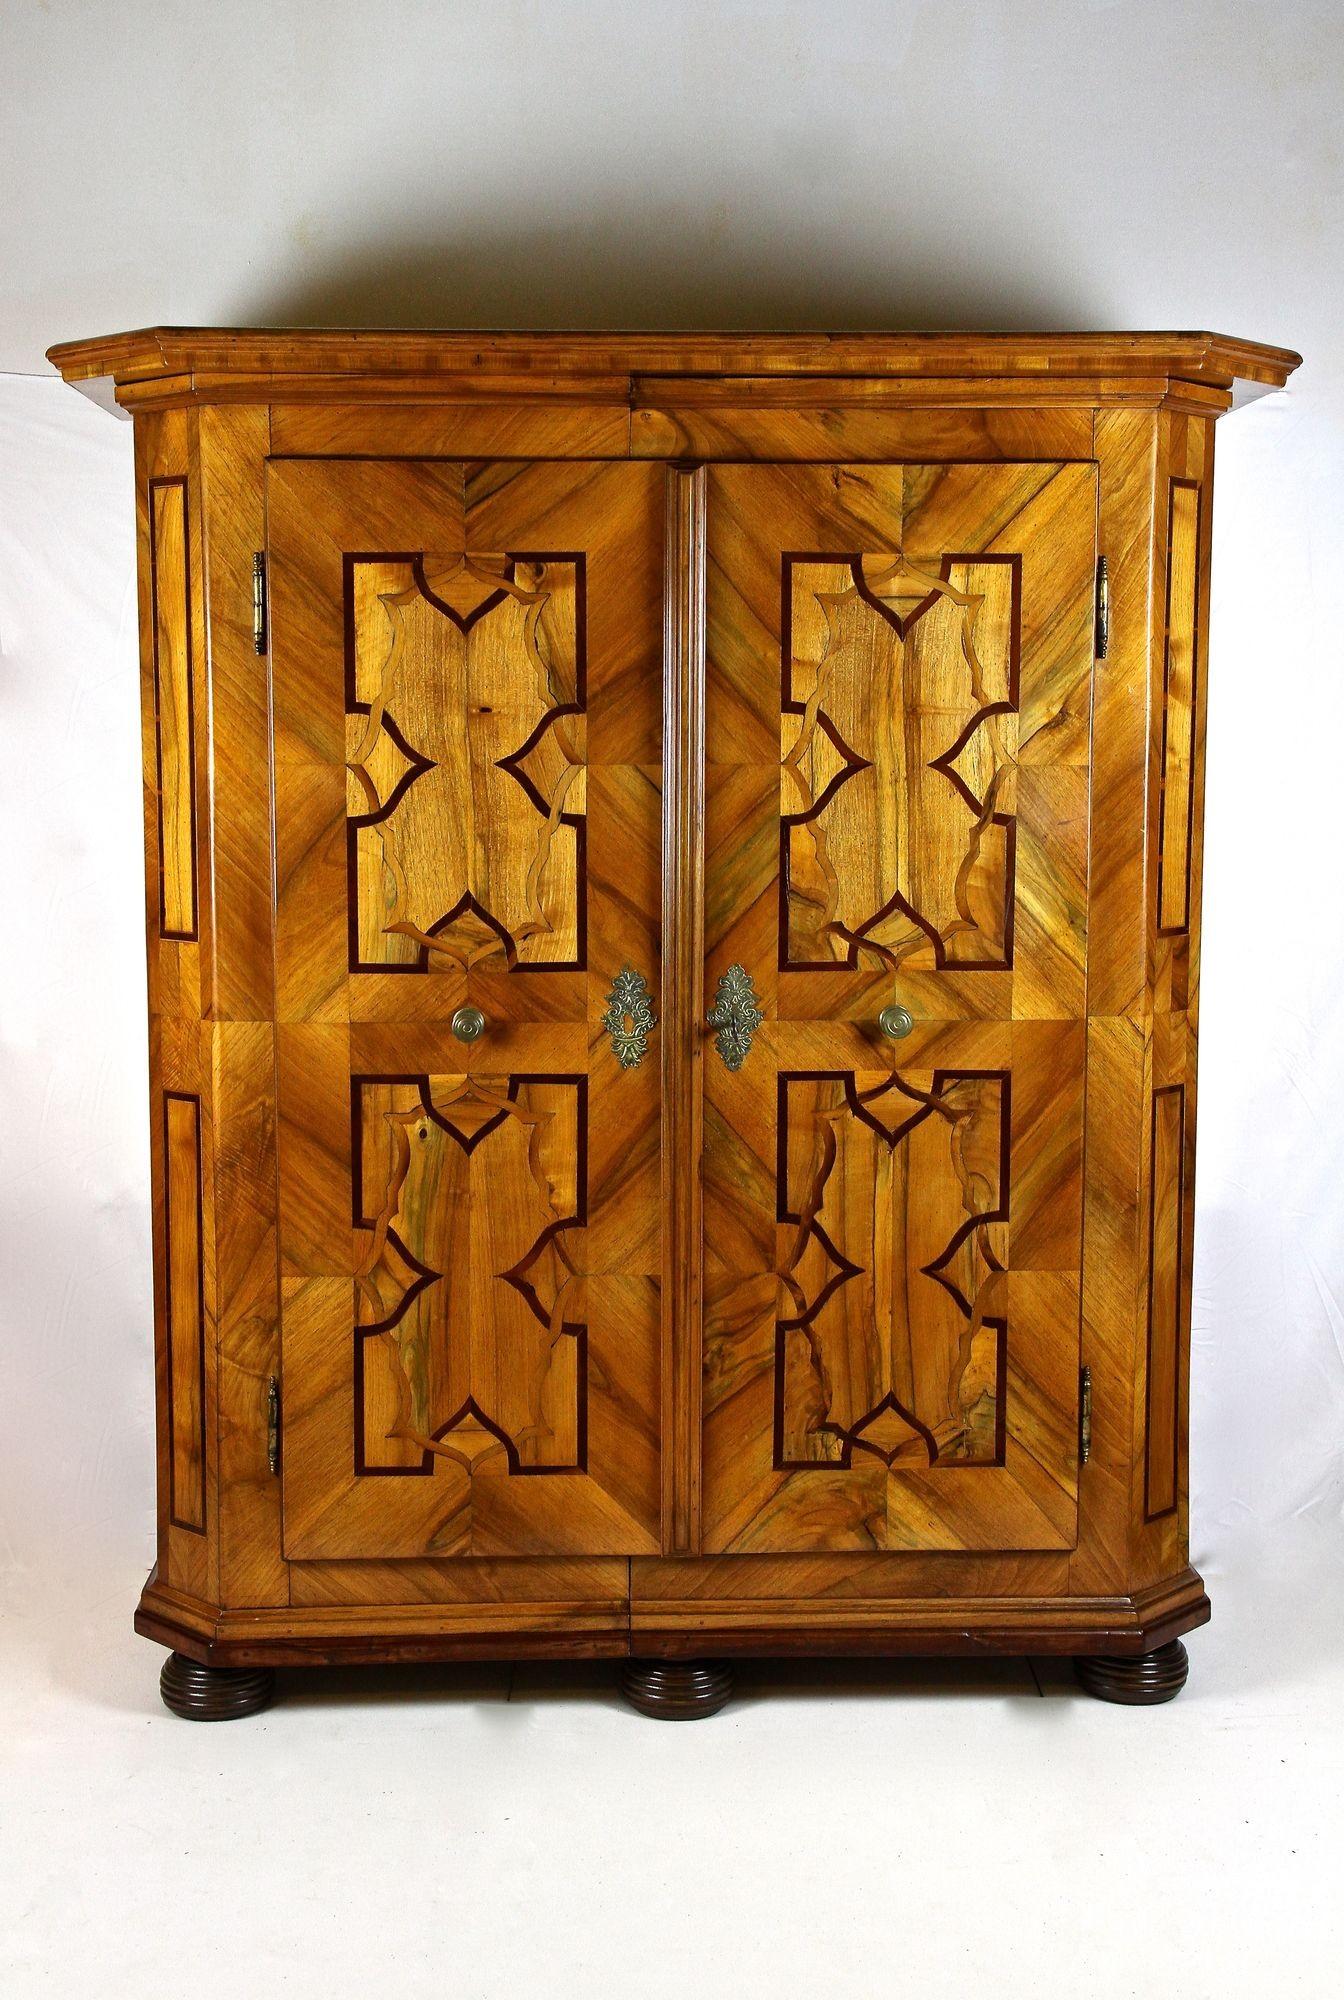 Absolutely beautiful 18th century nutwood baroque cabinet coming from a private castle in Austria. An artfully designed baroque cabinet which has been elaborately crafted in the period around 1780. The fantastic looking inlay works with nut, oak and